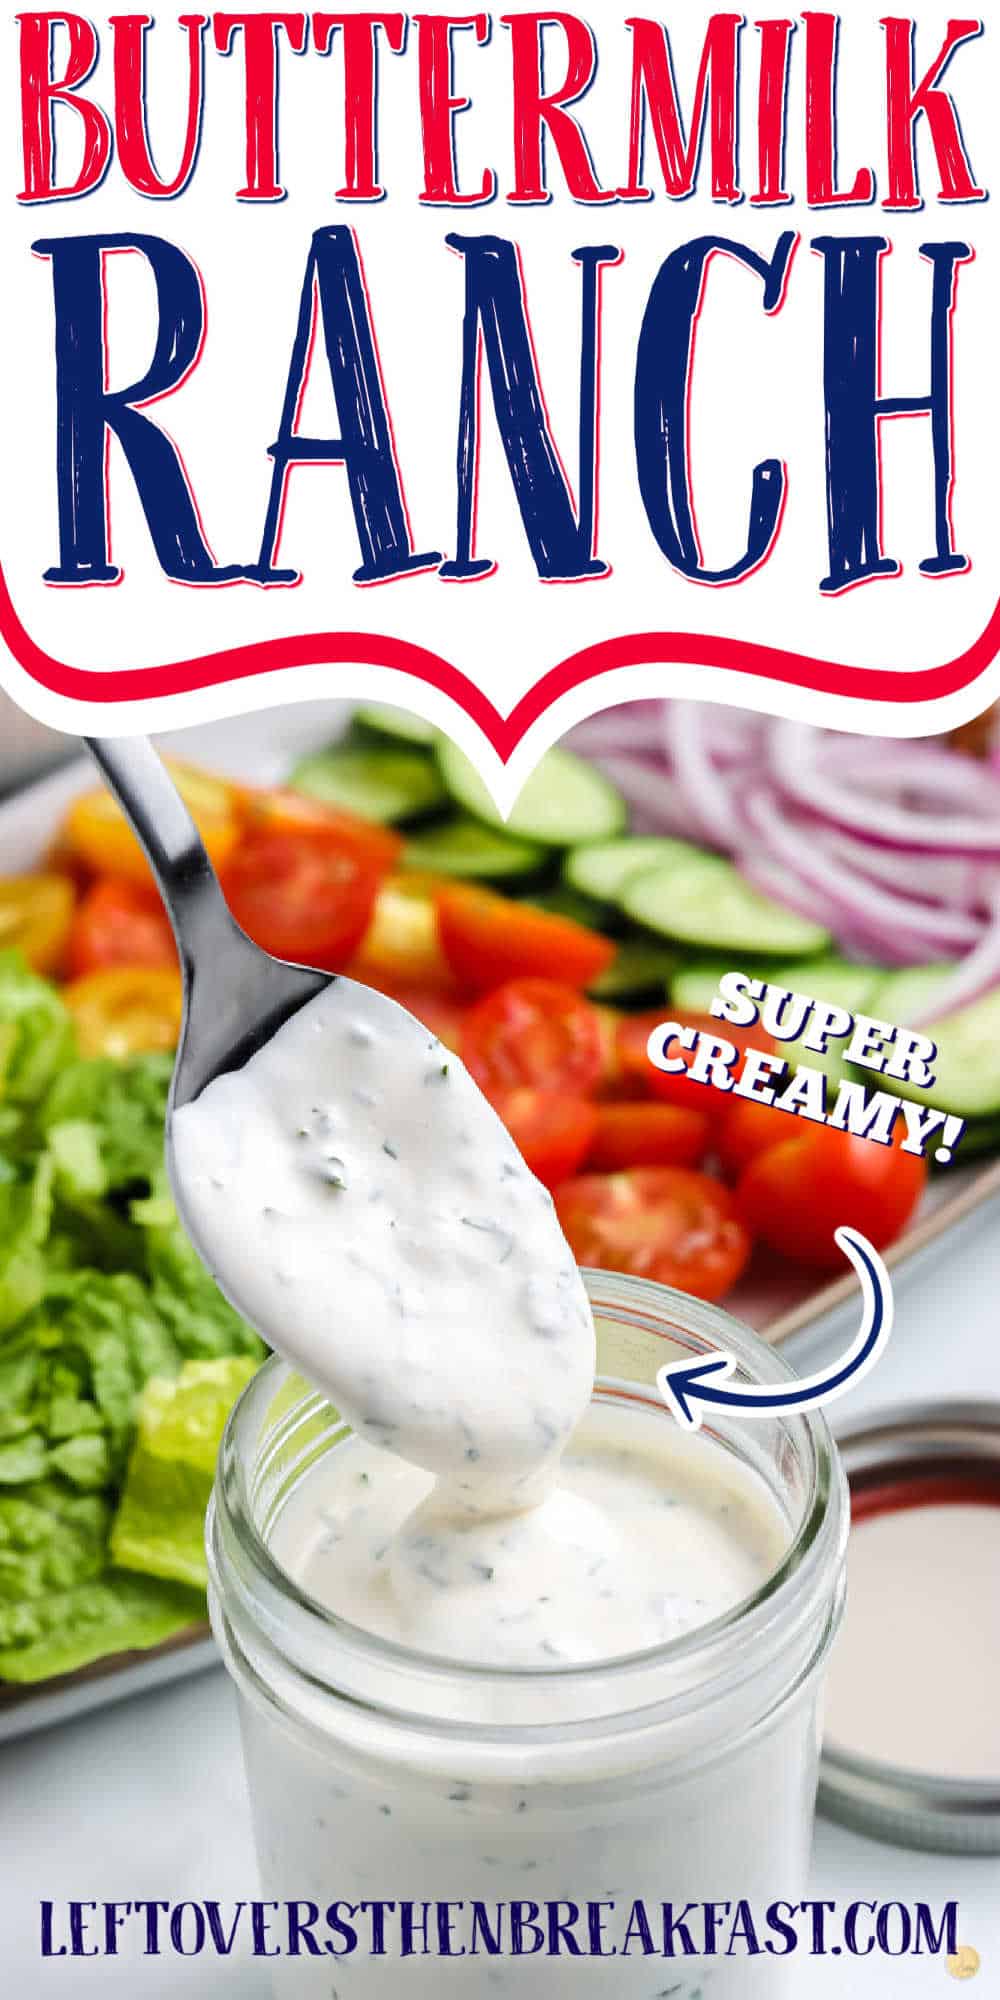 spoon of dressing with text "buttermilk ranch"